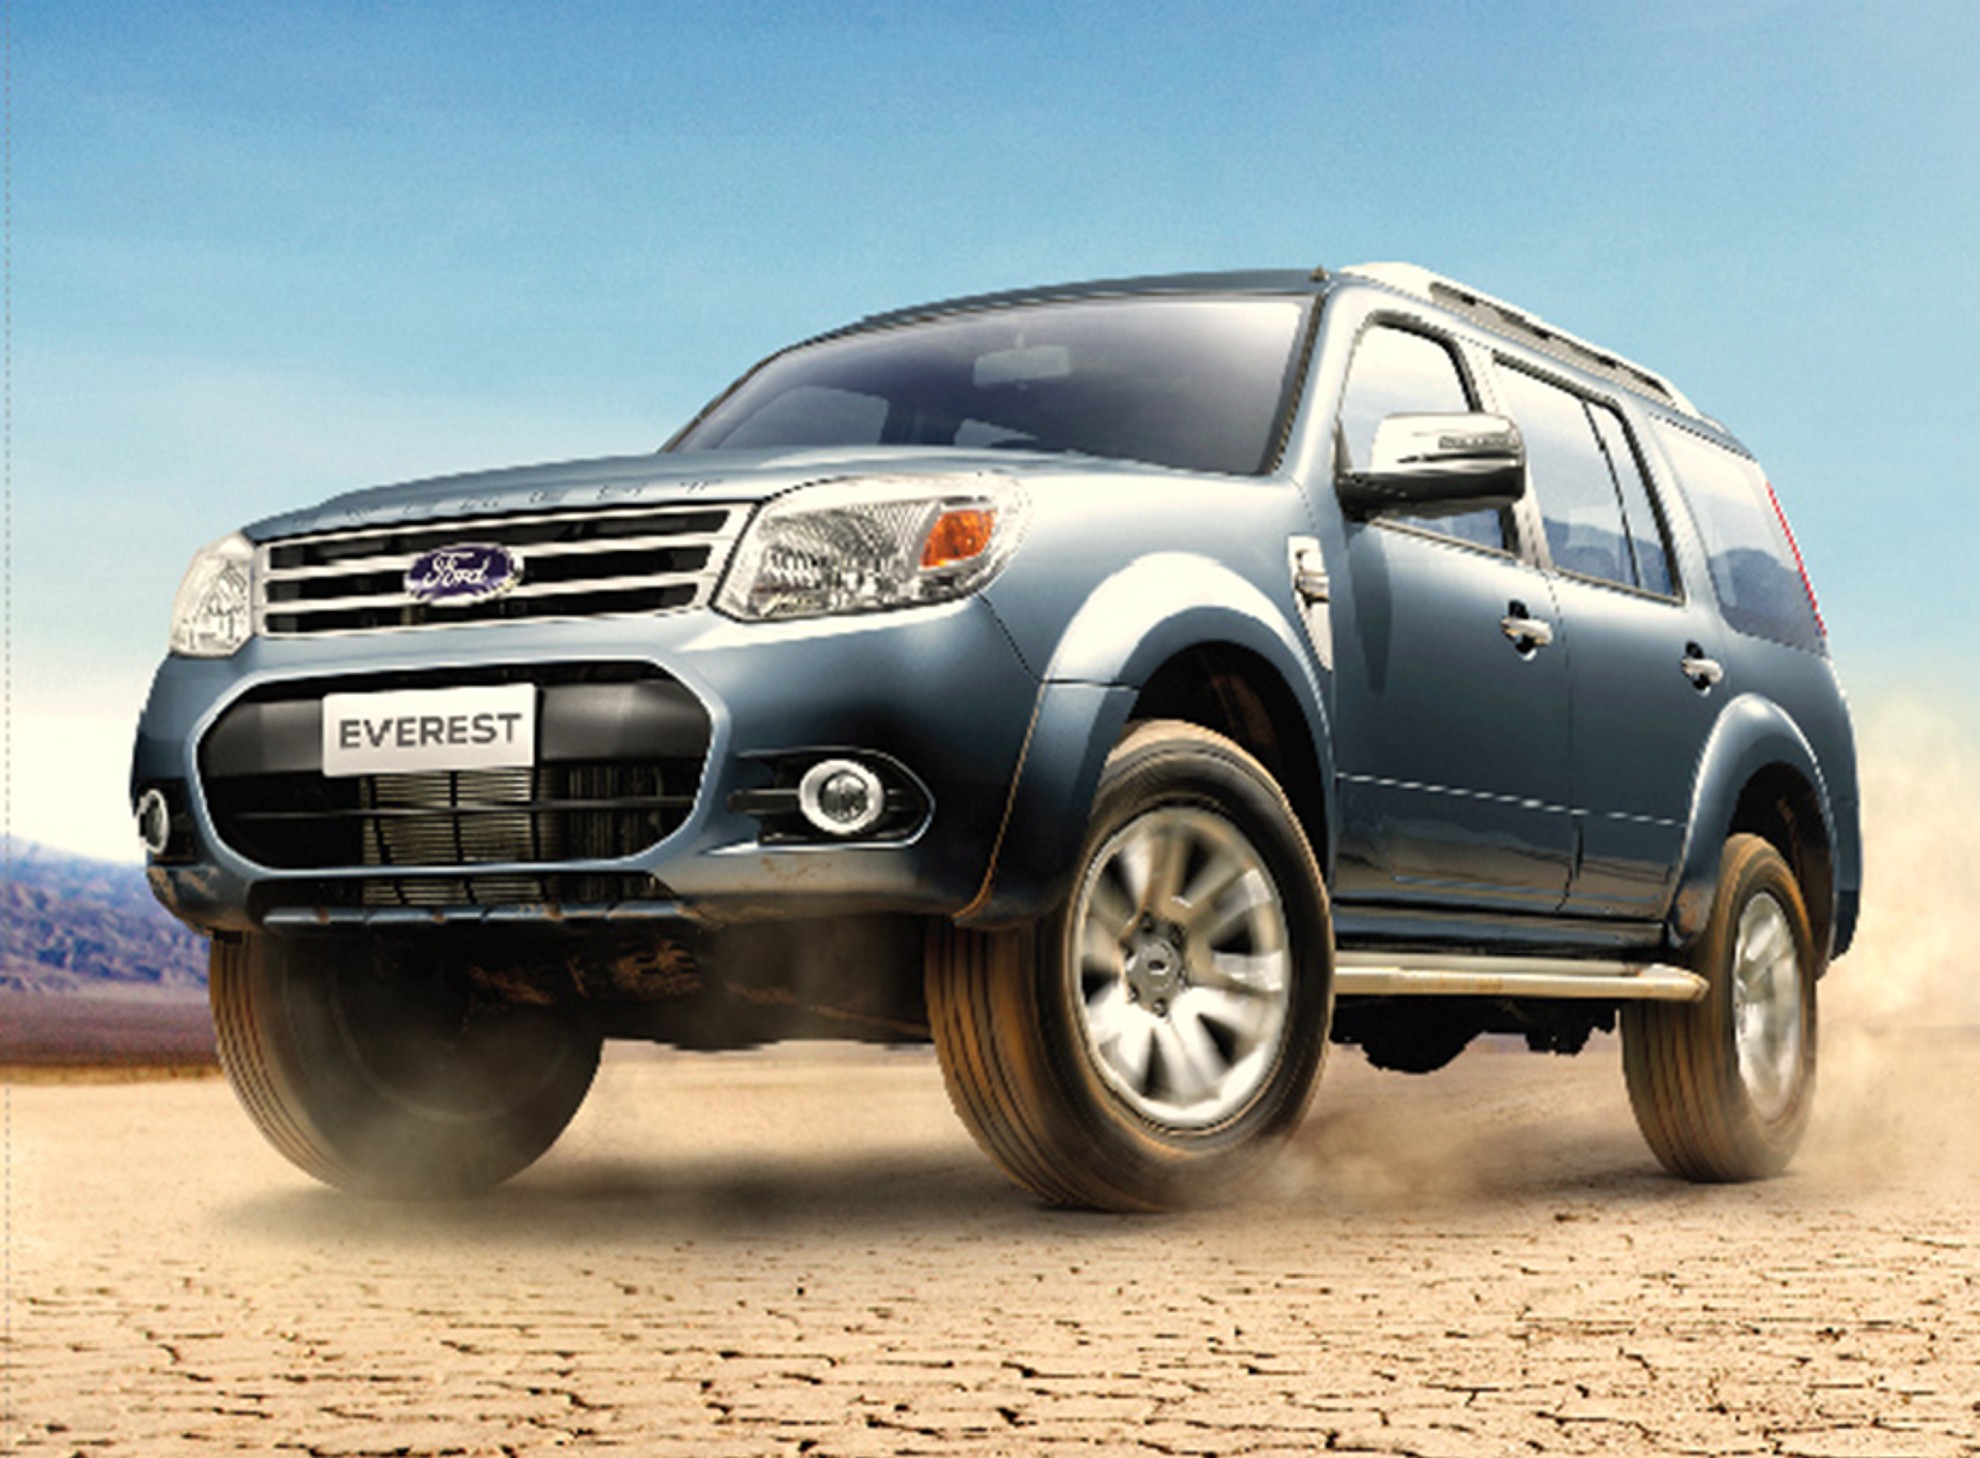 Ford Everest Refreshed and Ready for Adventure